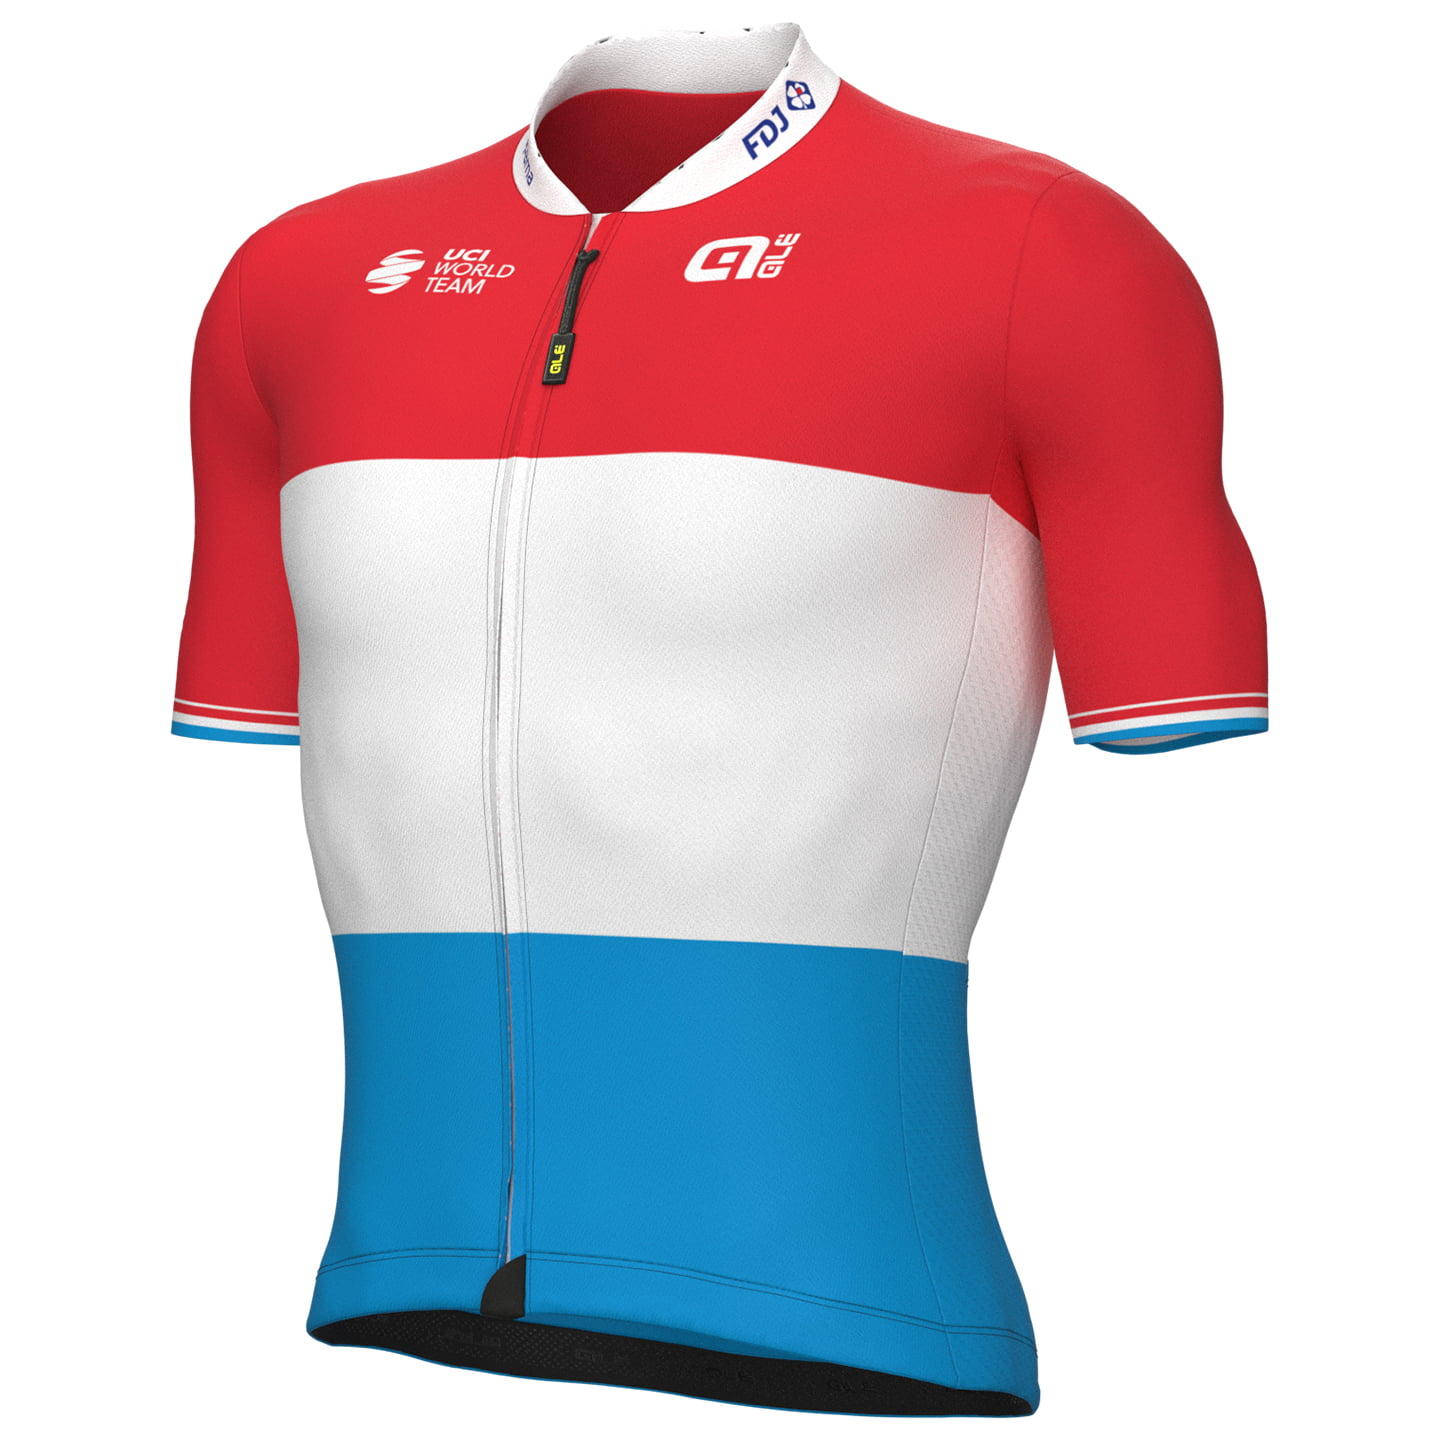 GROUPAMA-FDJ Luxembourgian Champion 2022 Short Sleeve Jersey, for men, size M, Cycle jersey, Cycling clothing